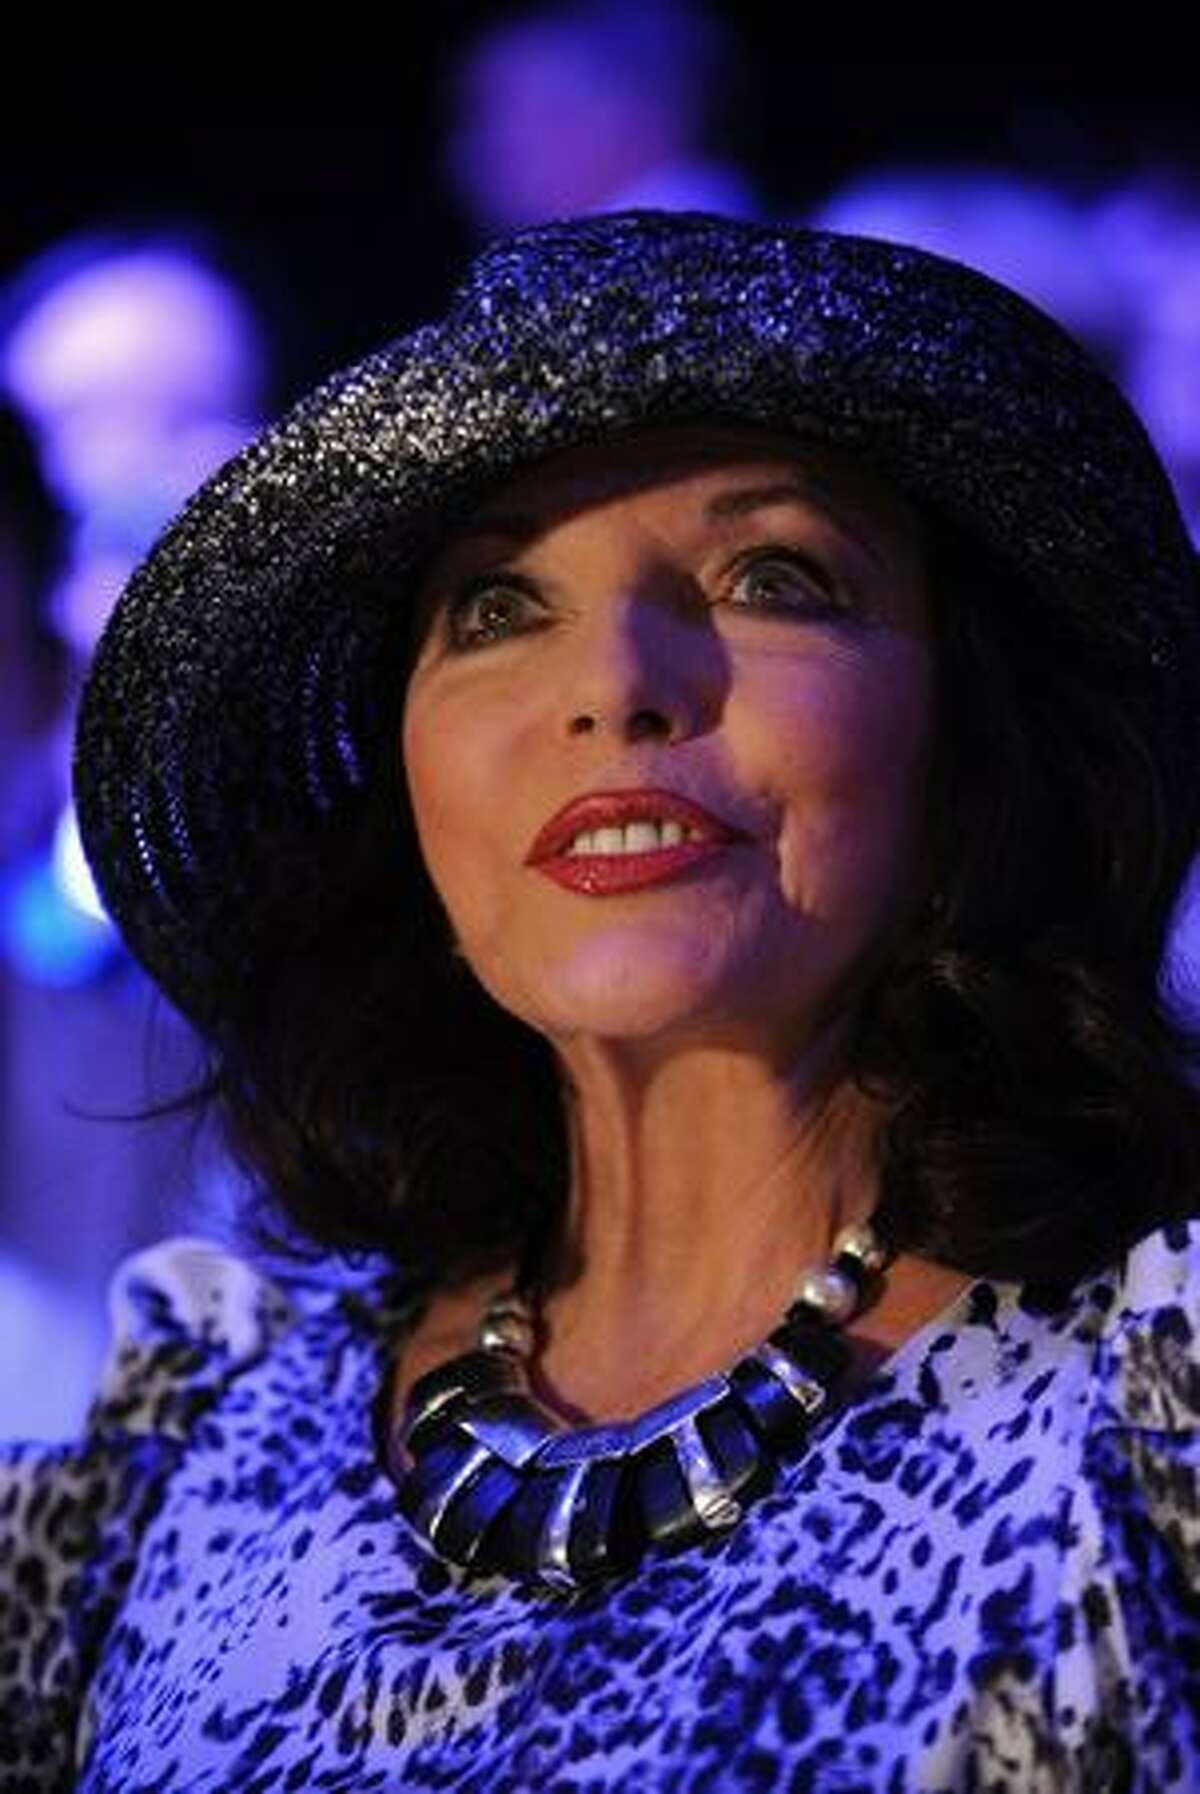 Joan Collins attends the Caroline Charles Fashion Show during London Fashion Week at Somerset House in London, England.